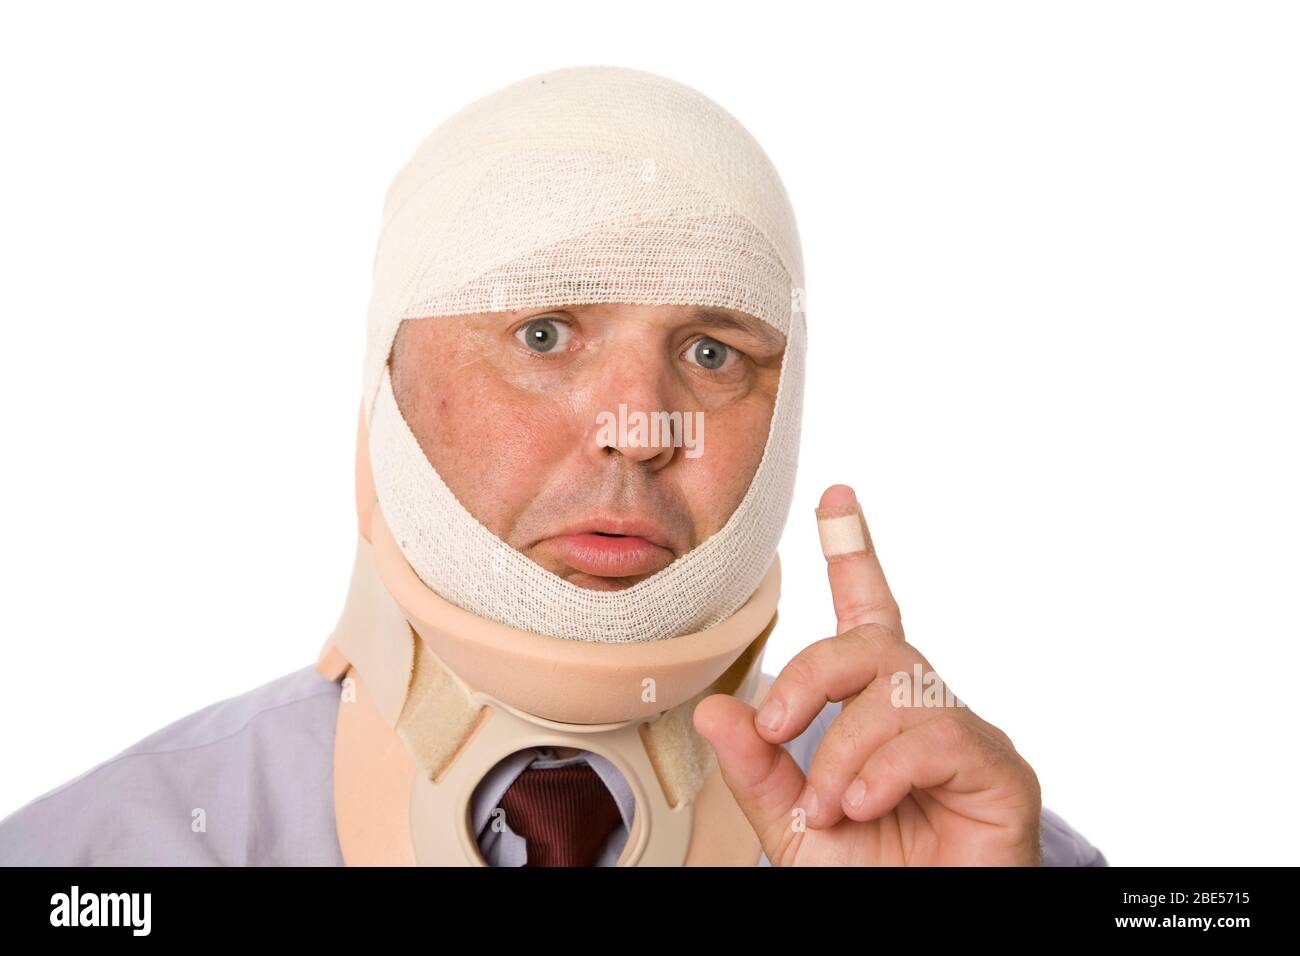 Various concepts of over estimation or exaggeration with a guy worried about his sore finger. Stock Photo